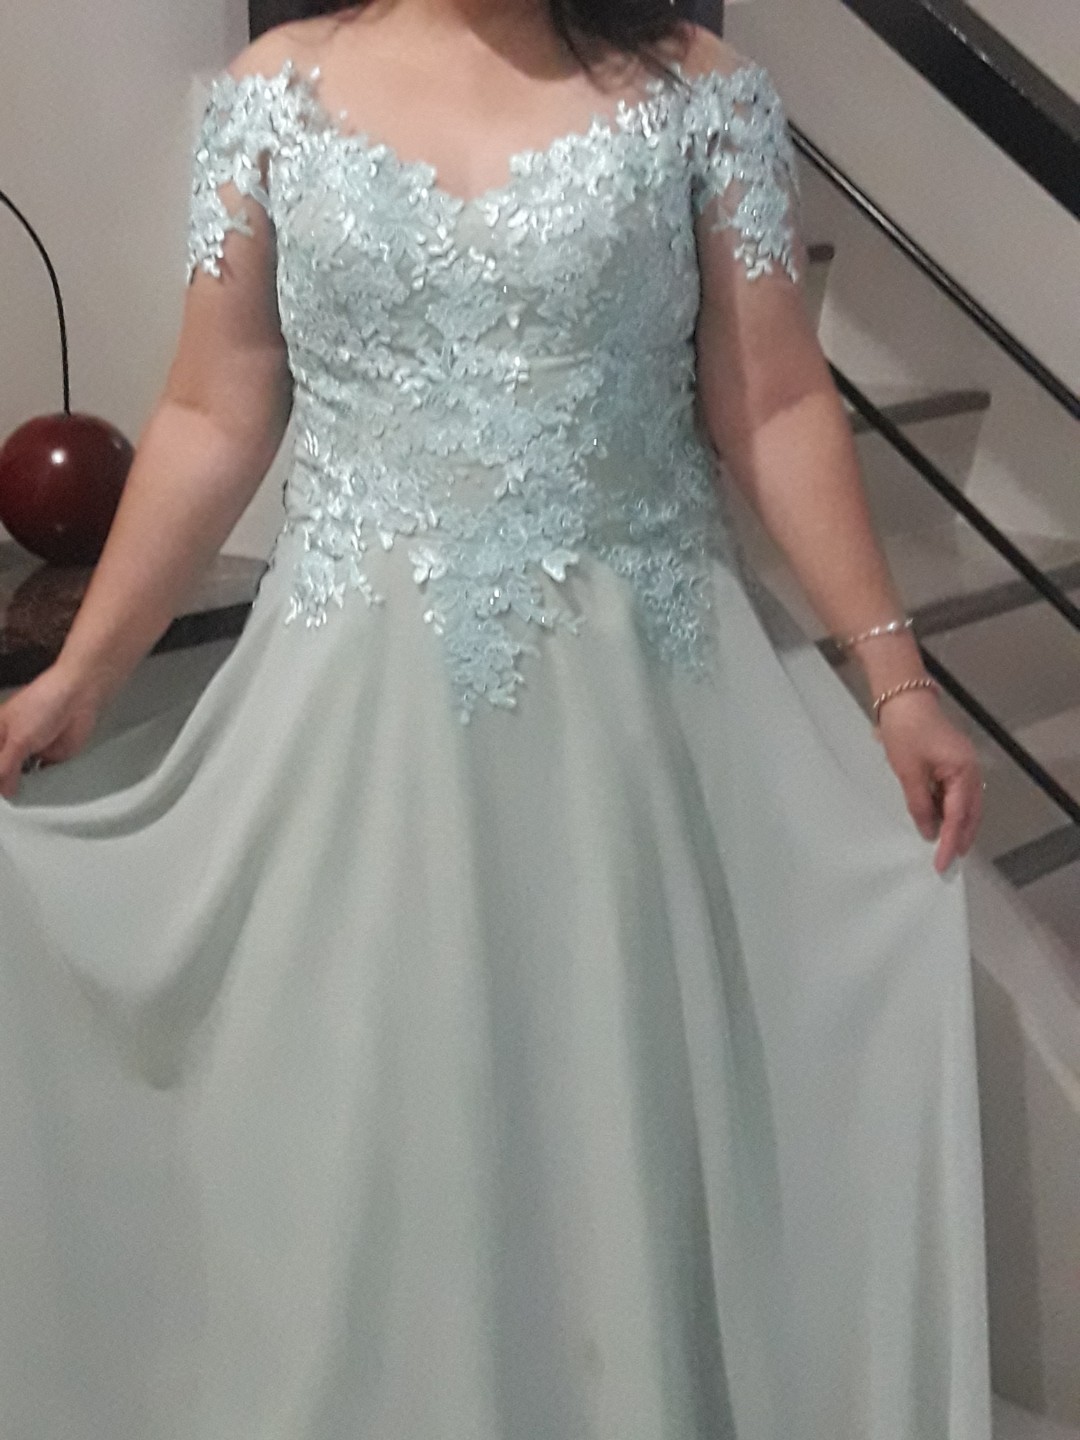 gown for wedding sponsor